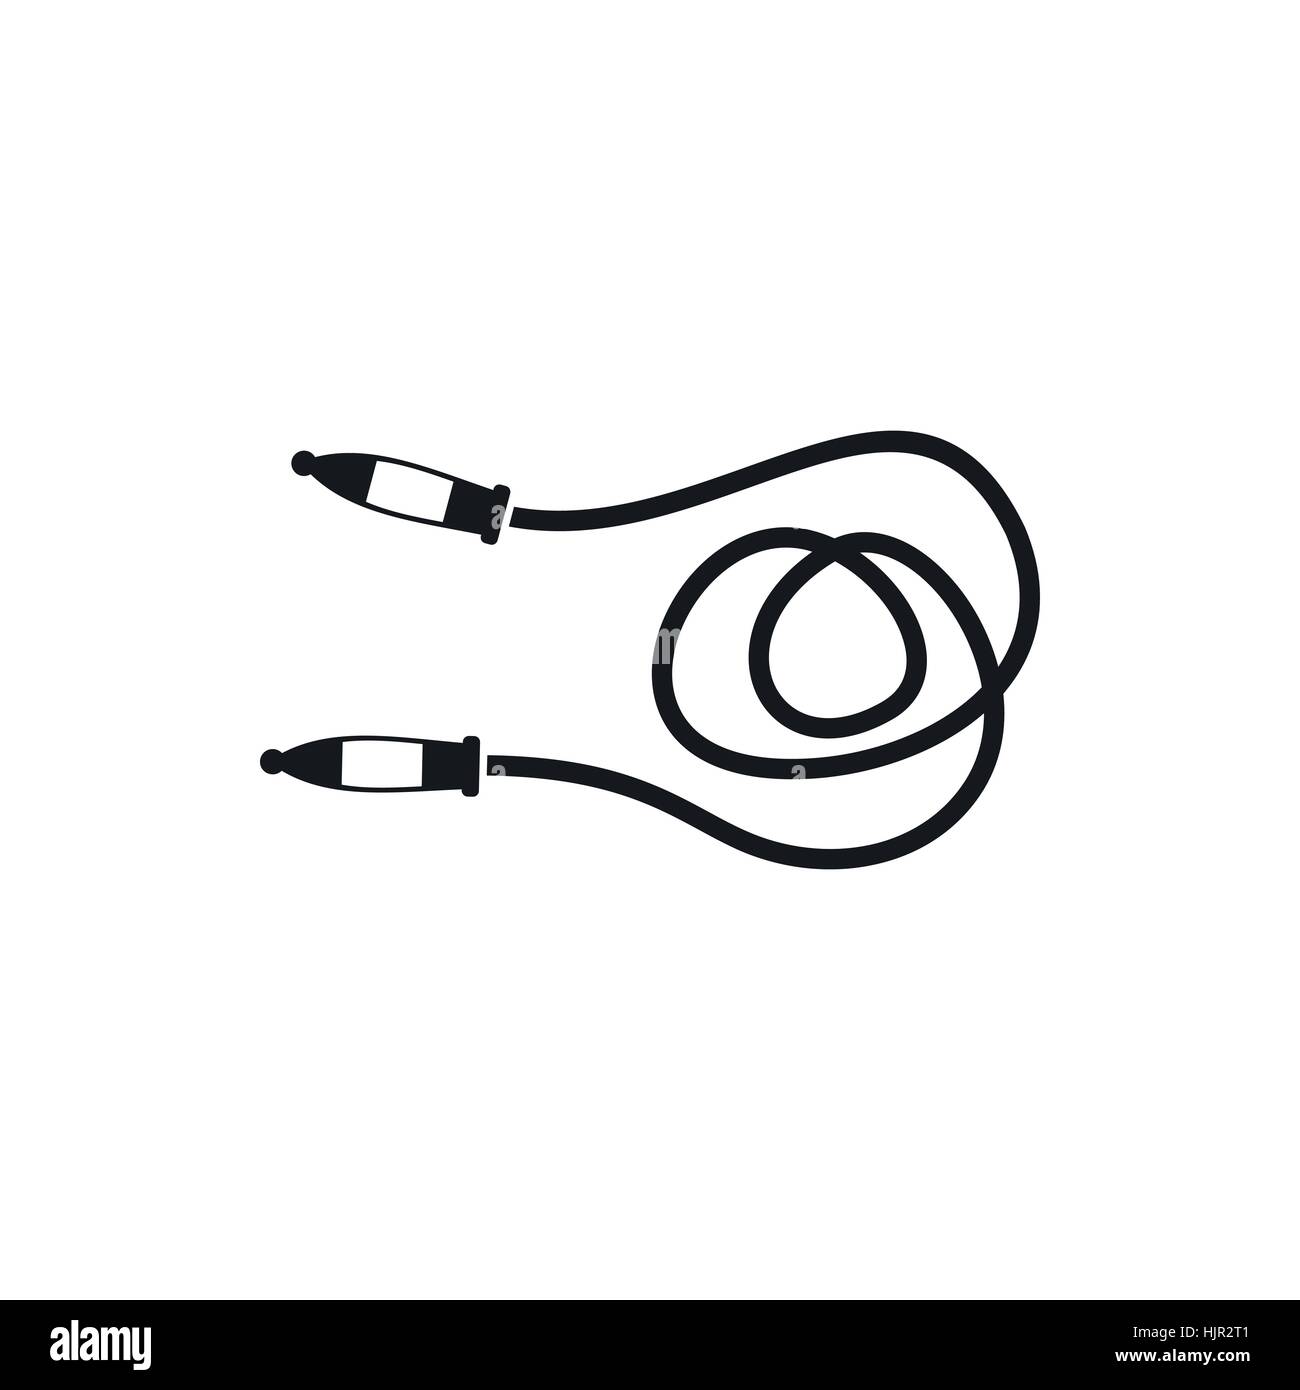 Skipping rope icon in simple style on a white background Stock Vector